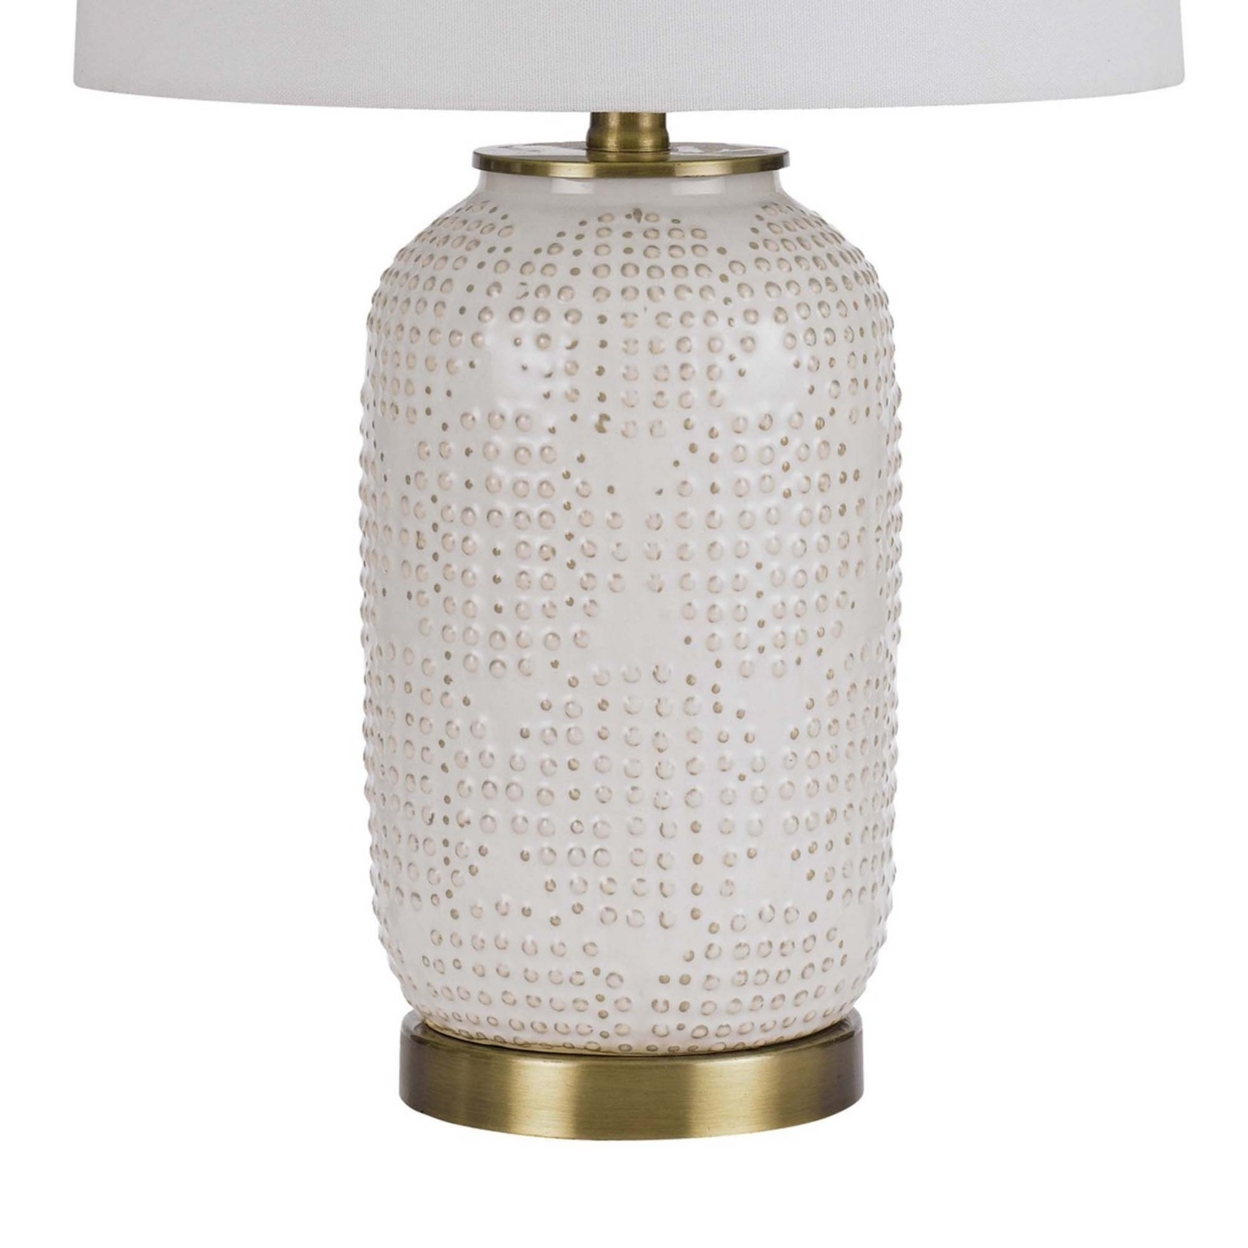 Table Lamp With Dotted Ceramic Body And Round Base, White- Saltoro Sherpi